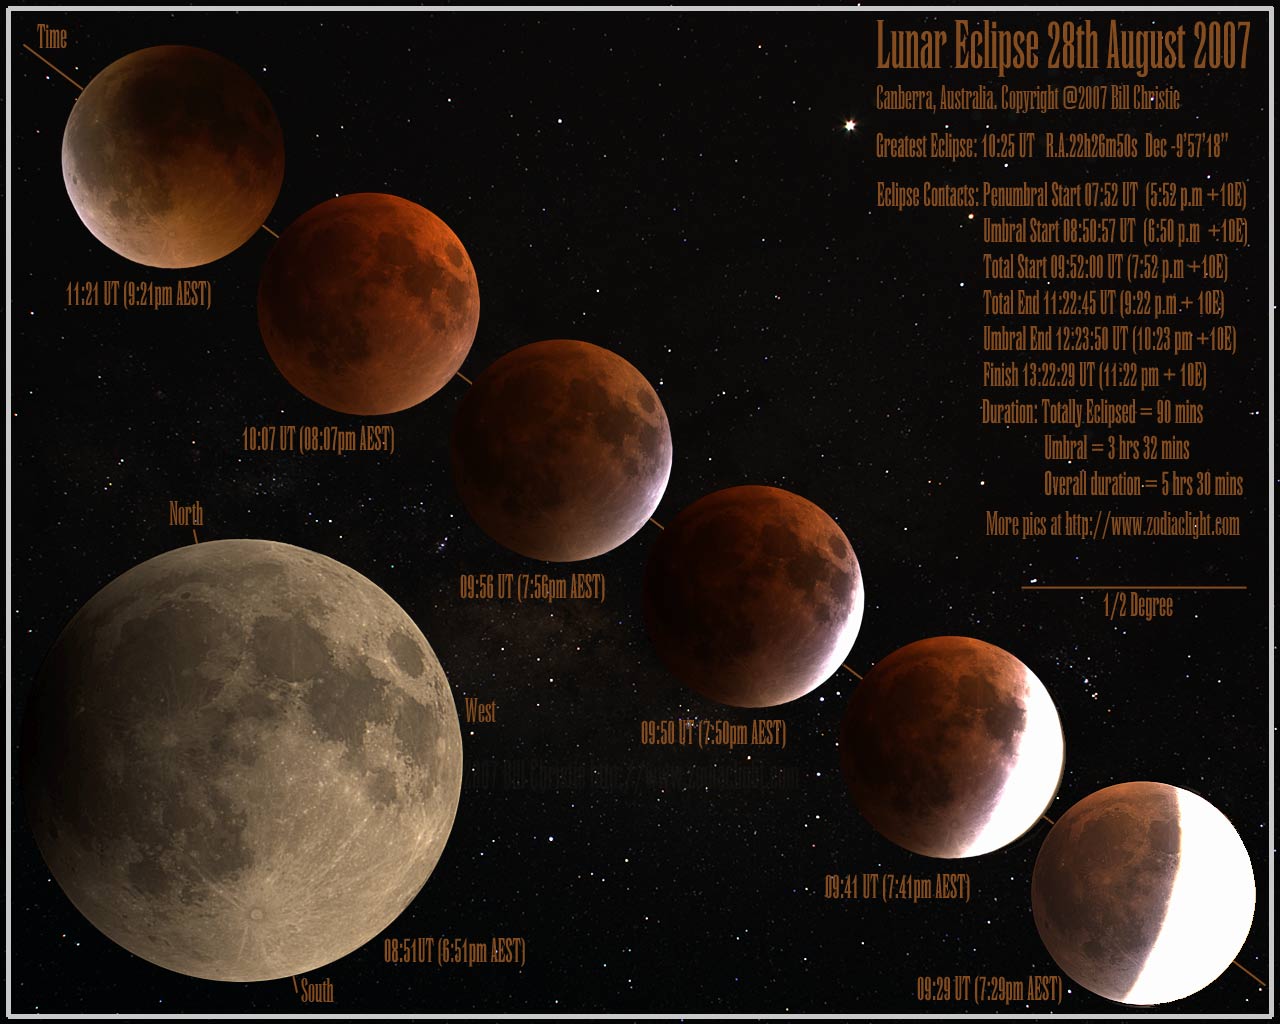 Heres a montage of the eclipse showing the moons progress into the ...